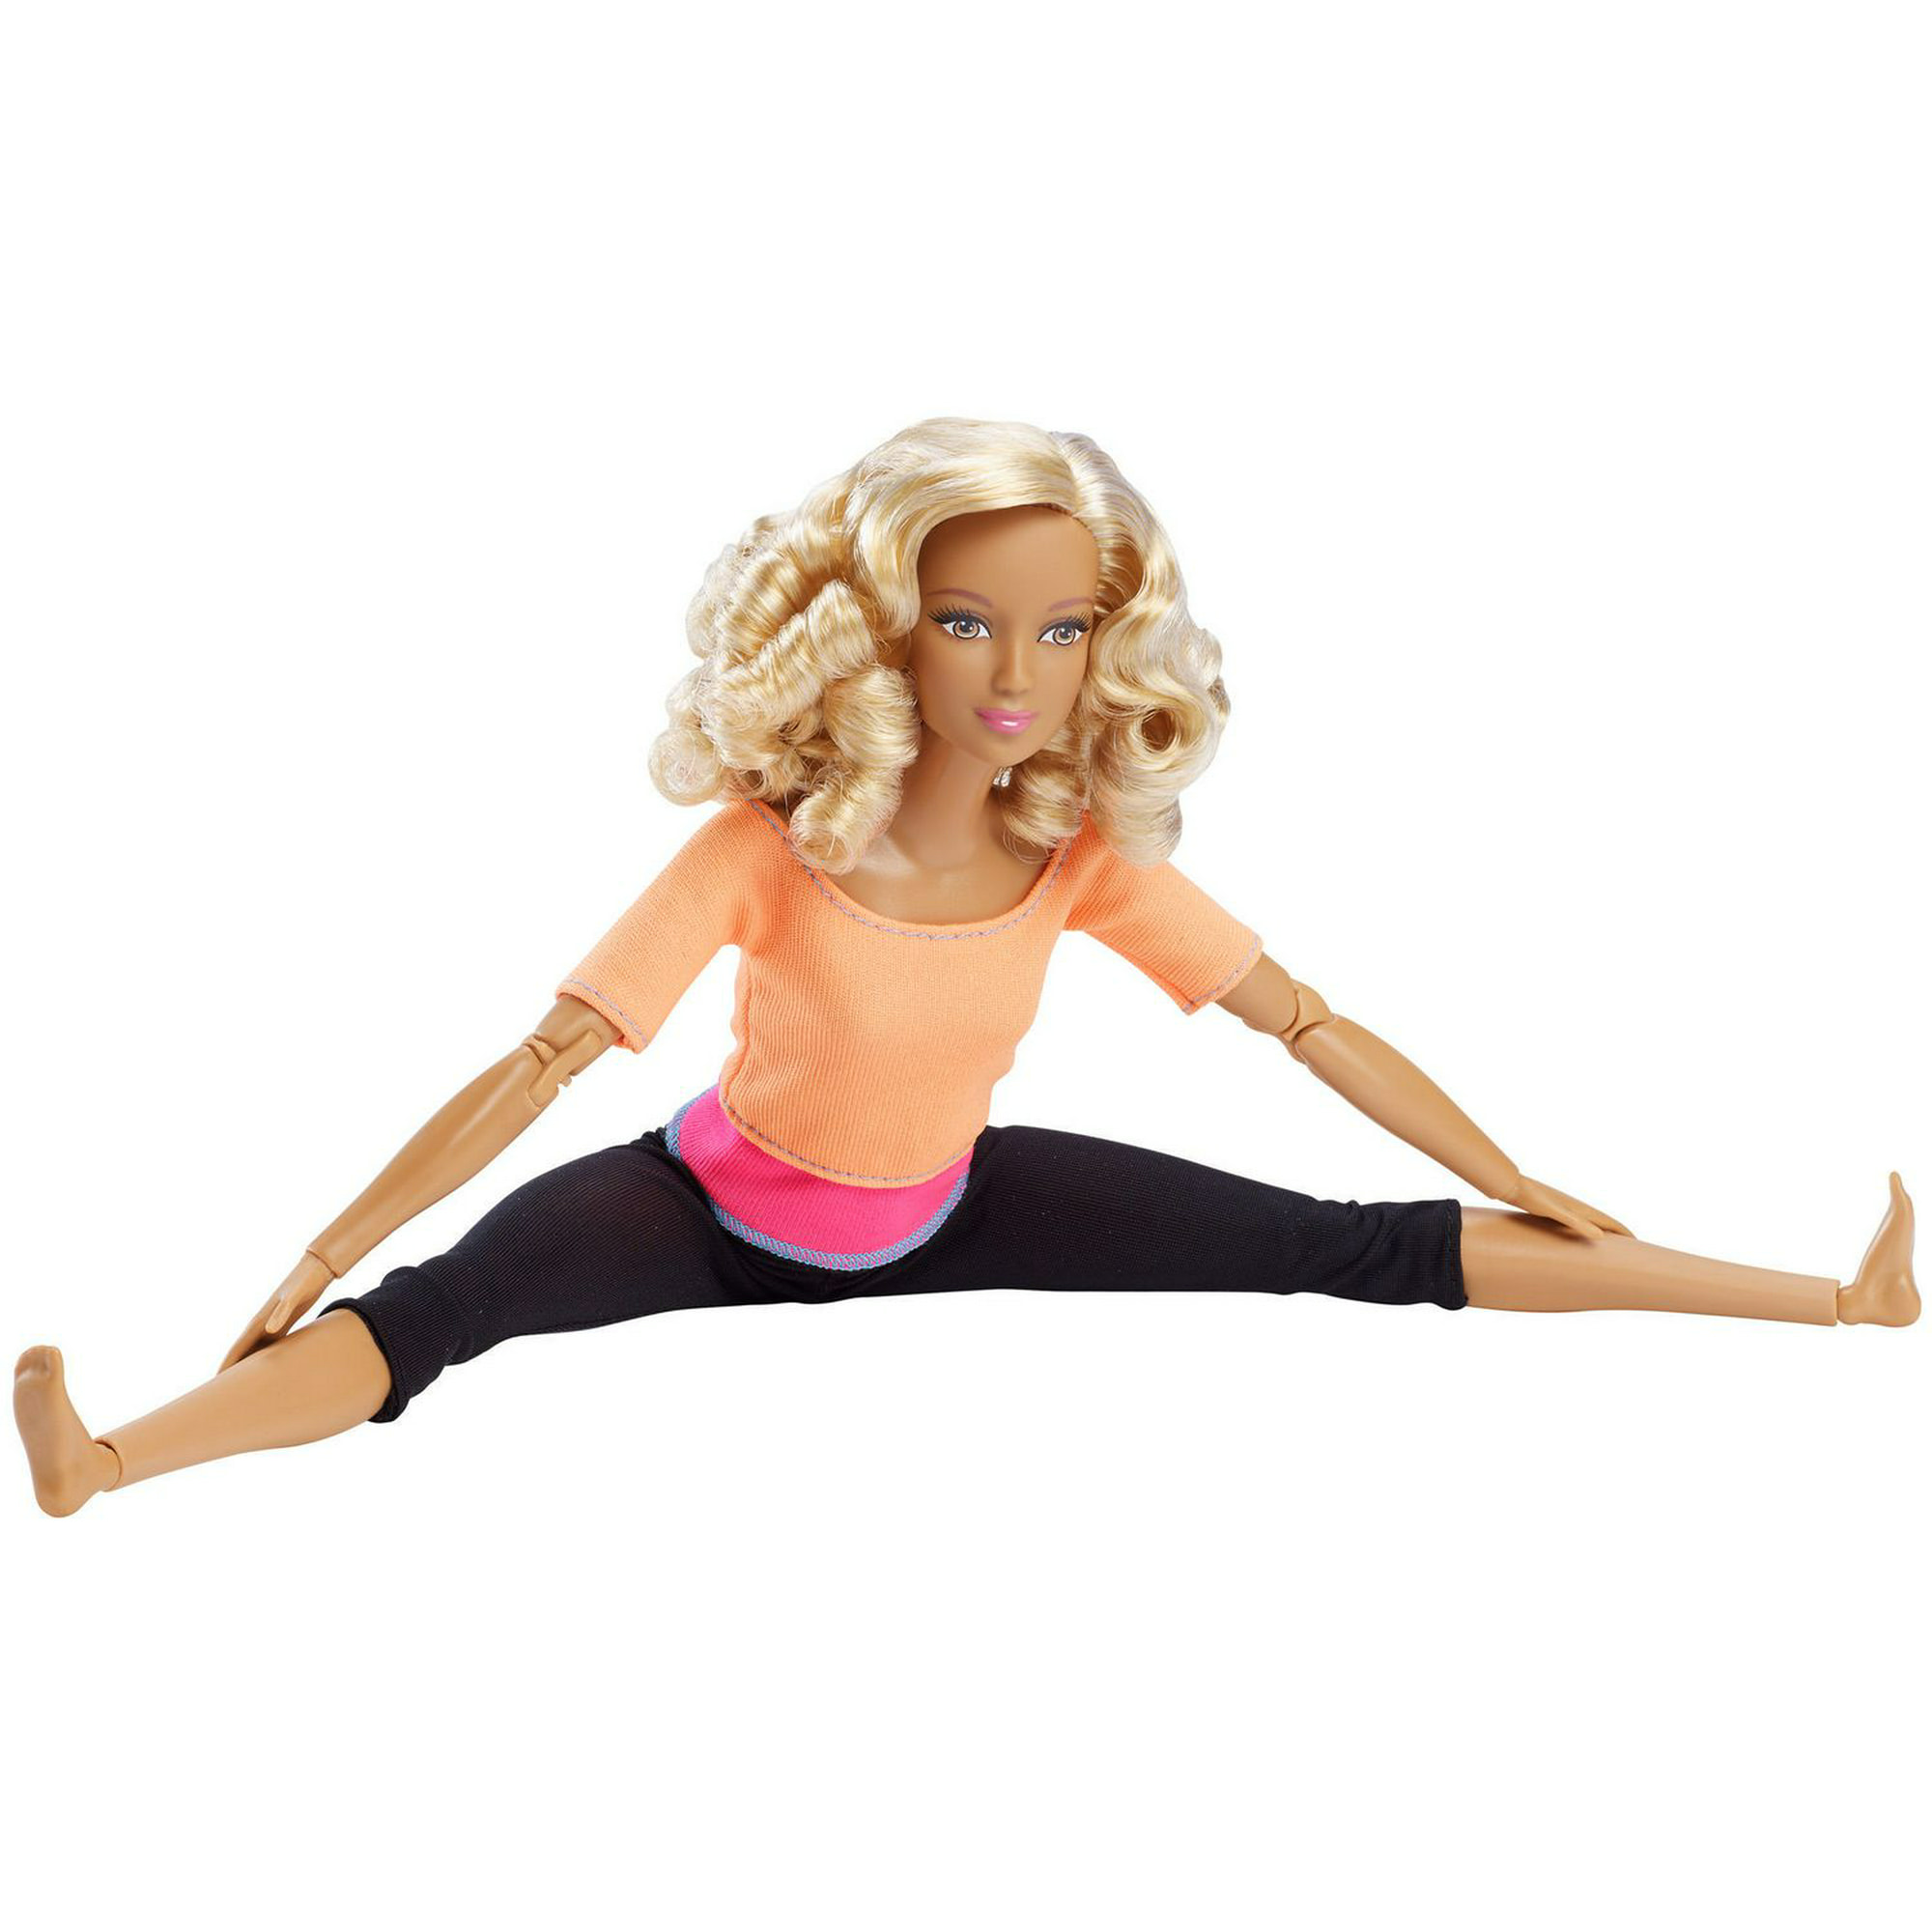 Barbie Made to Move Blonde Doll 